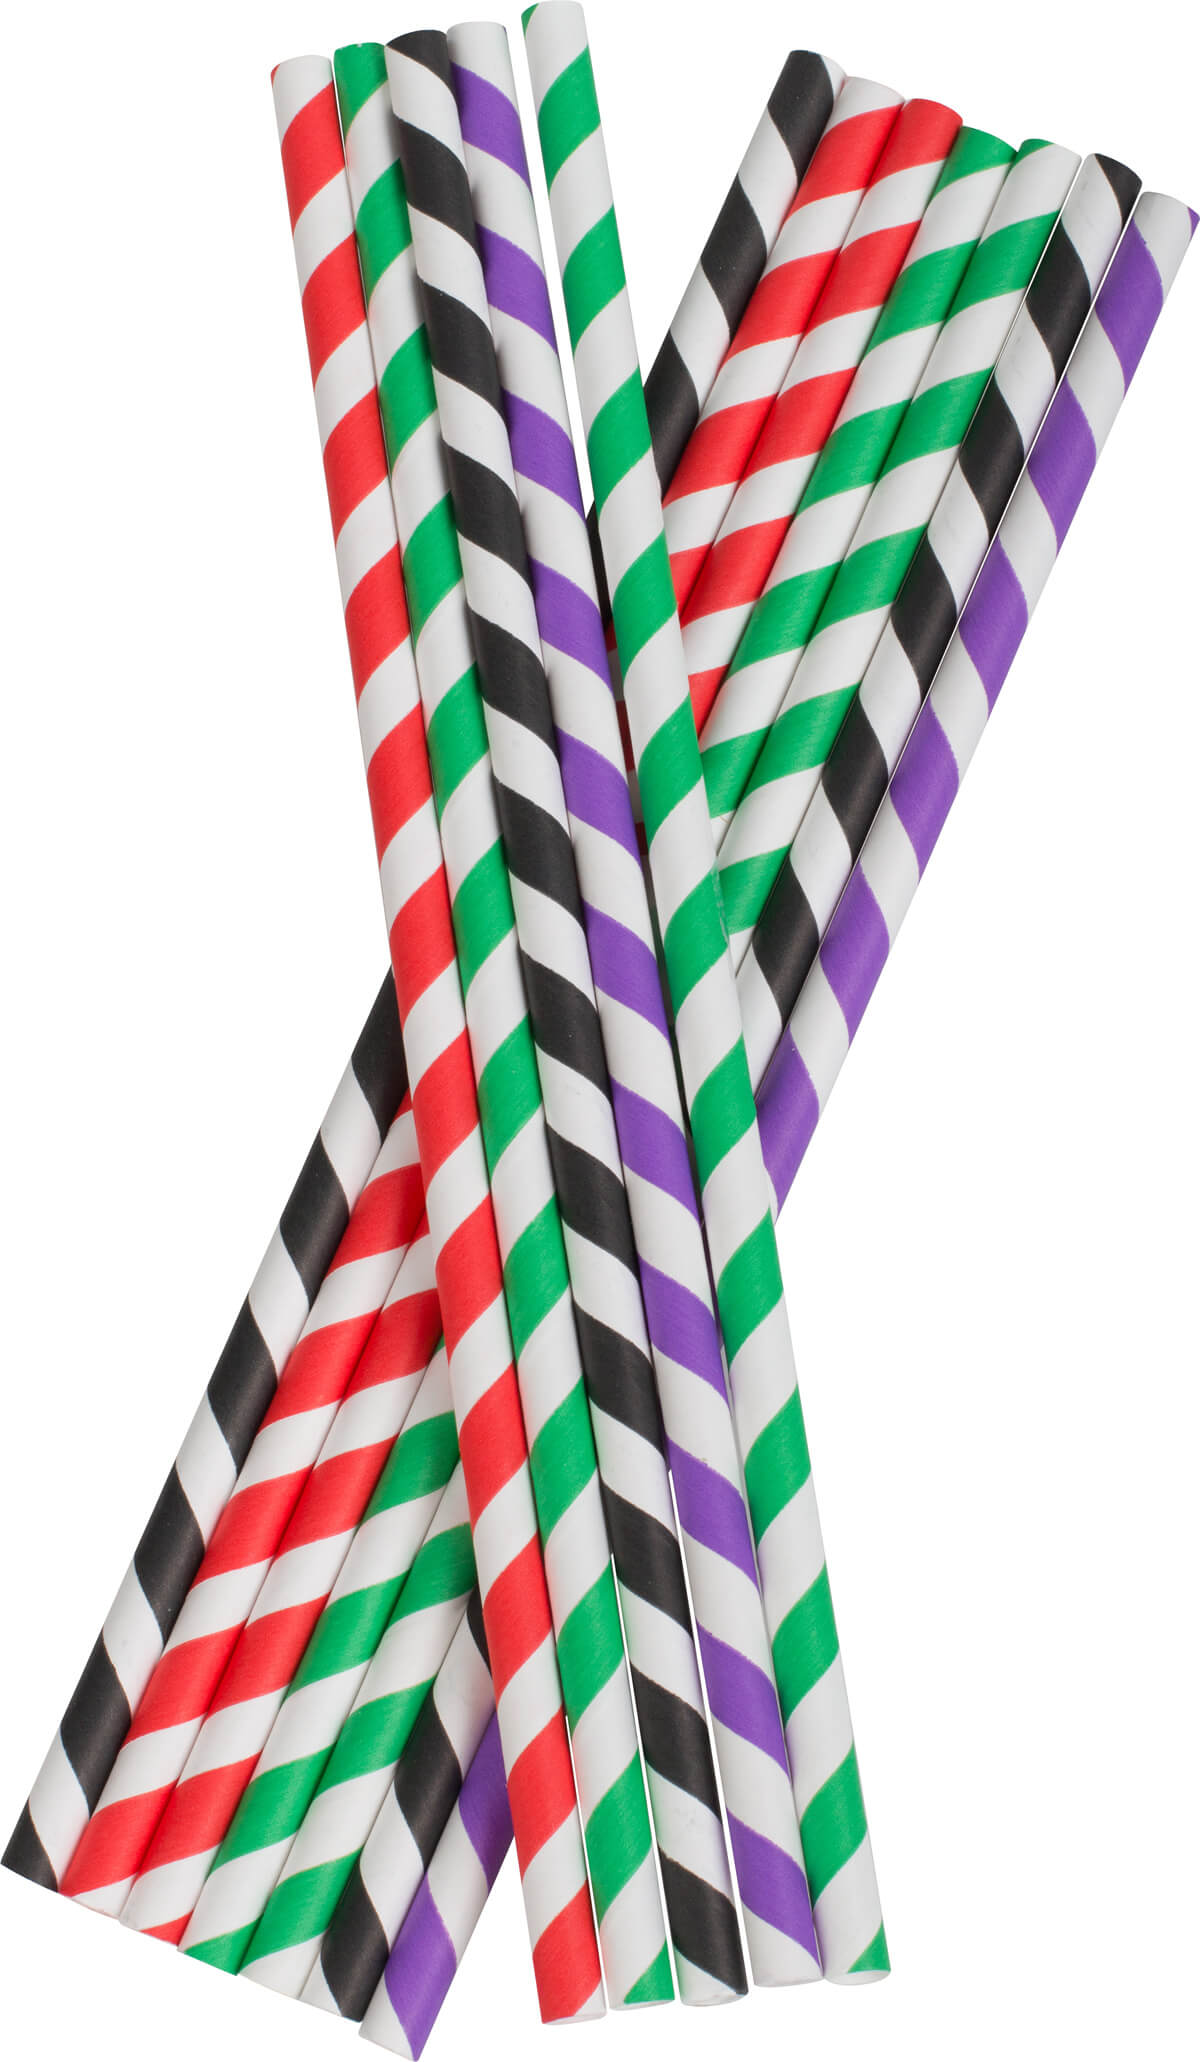 Drinking Straws, Paper (8x255mm) - various colors striped